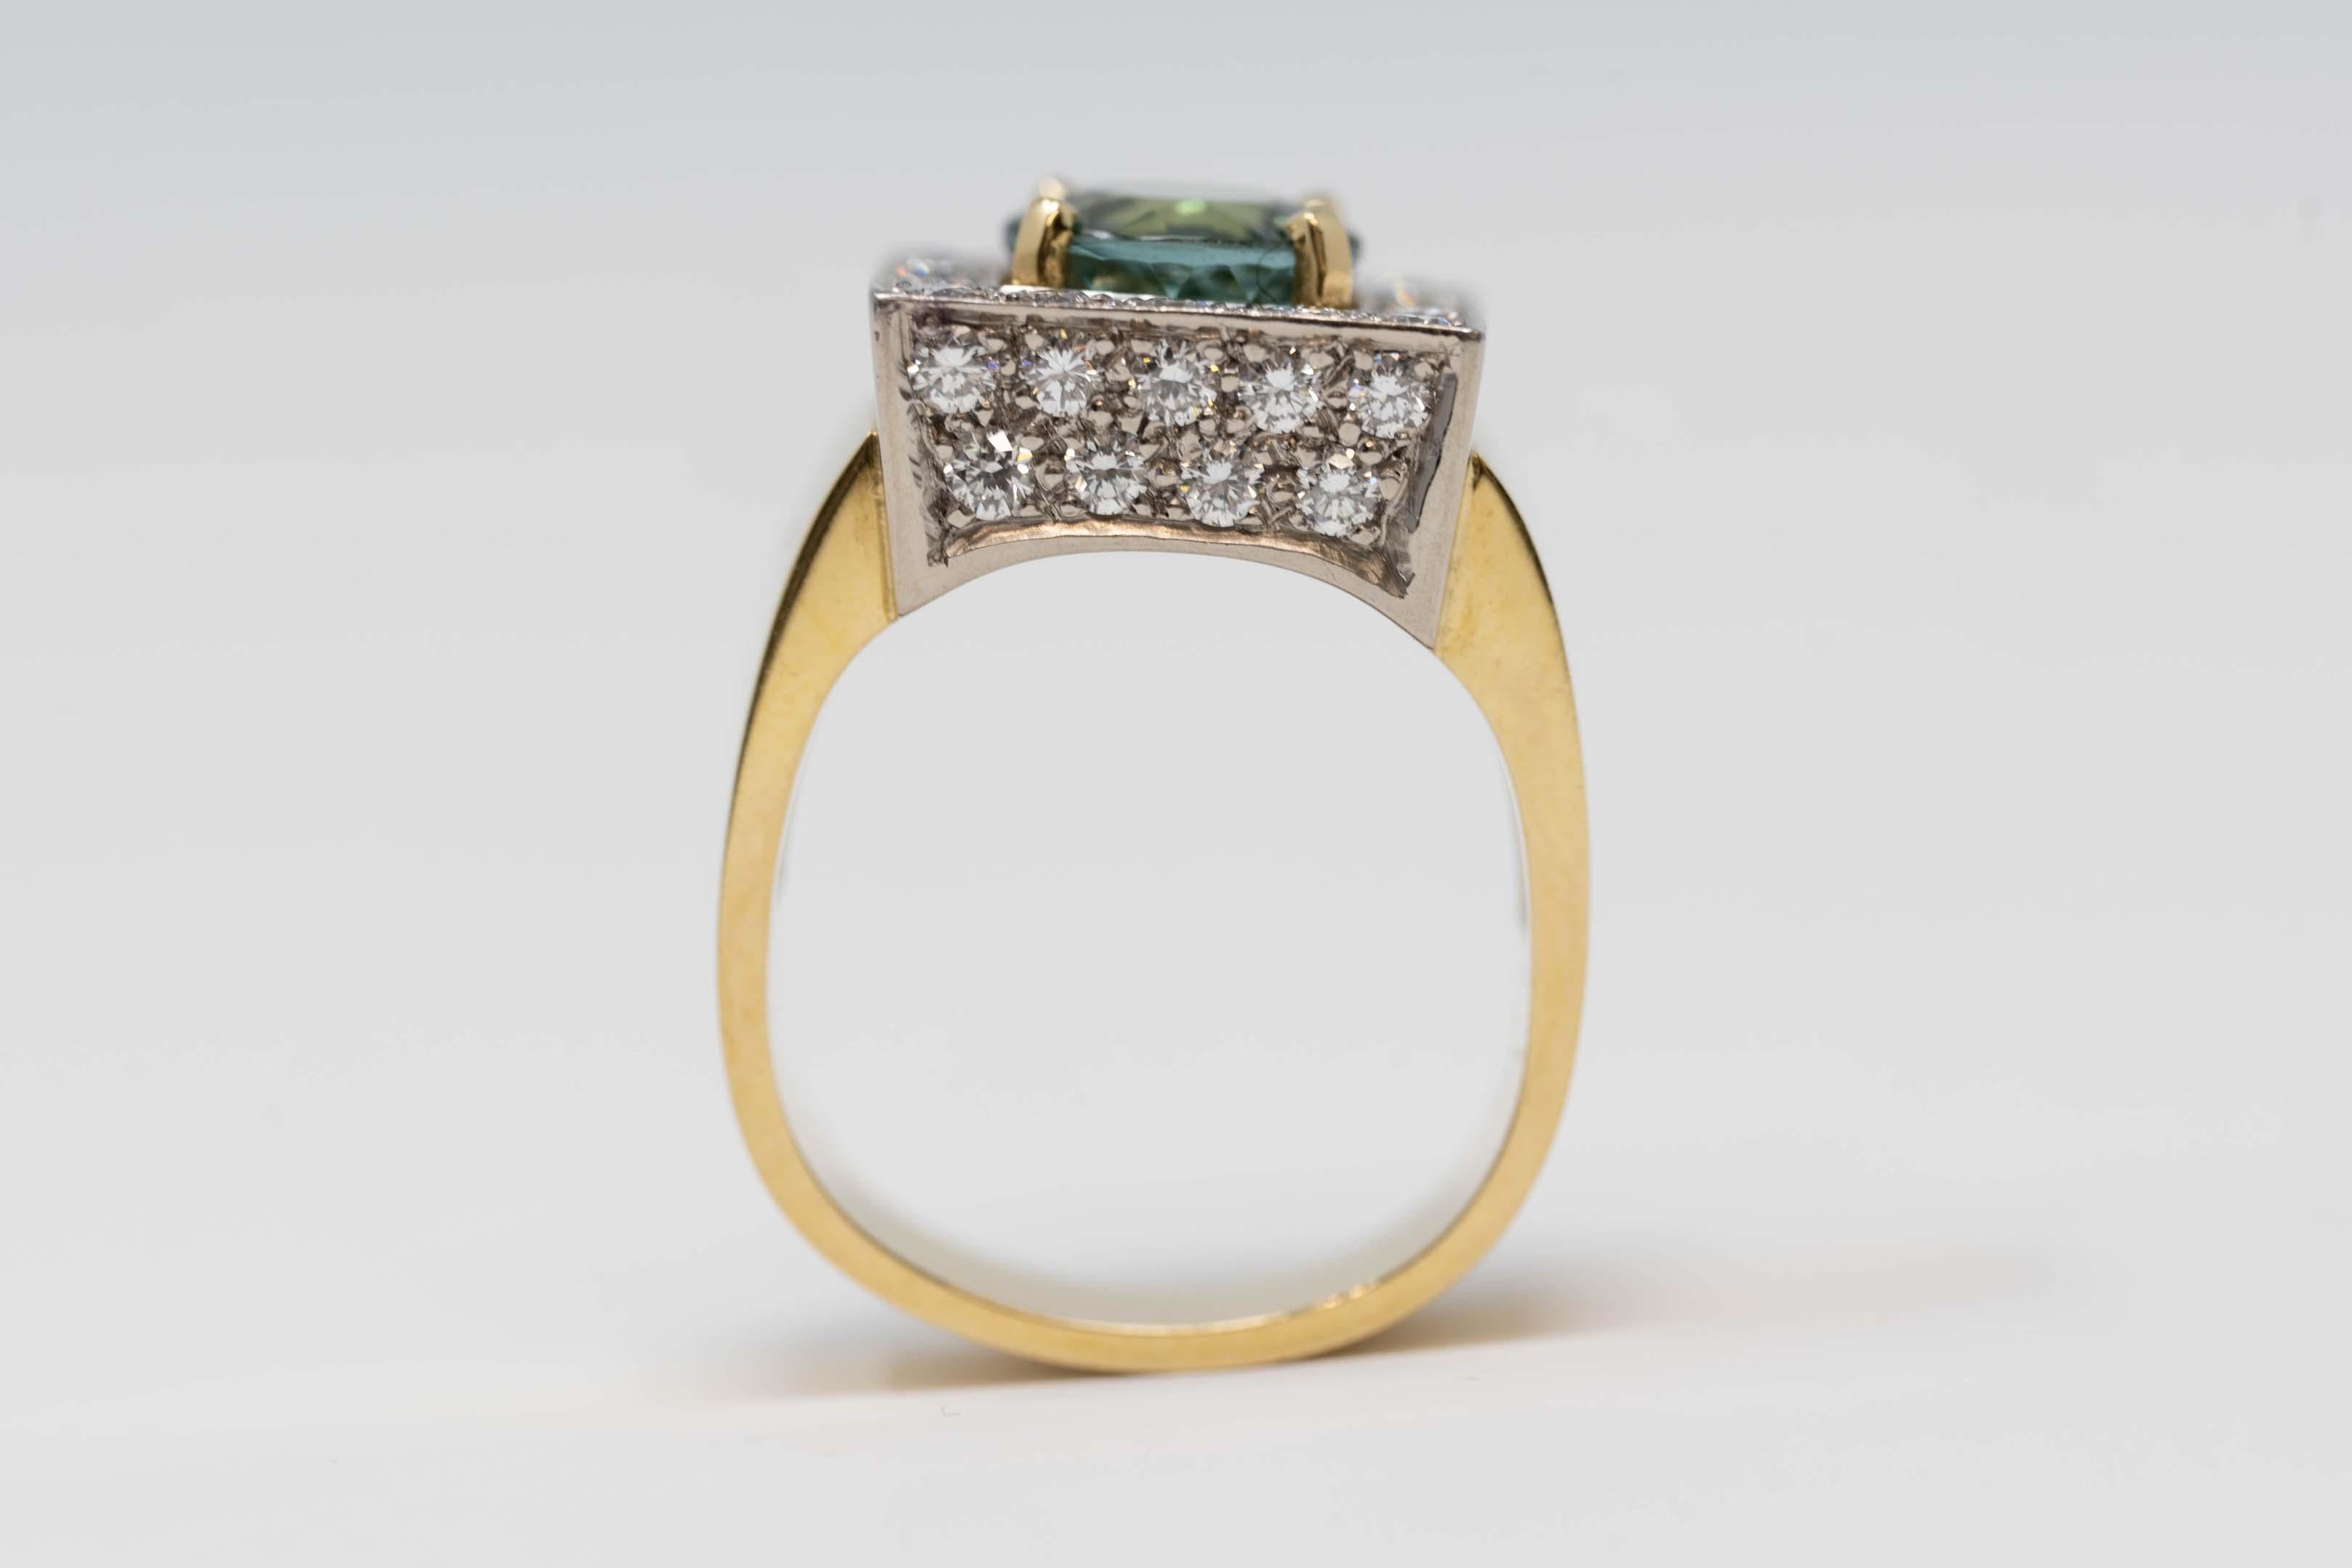 One (1) ladies ring in yellow and white 18 karat gold (stamped), fantasy style, polished finish, total weight 13.6 grams.  The ring is set with thirty-four (34) round brilliant cut diamonds, average weight 0.03 carat each, total weight: 1.00 carat.